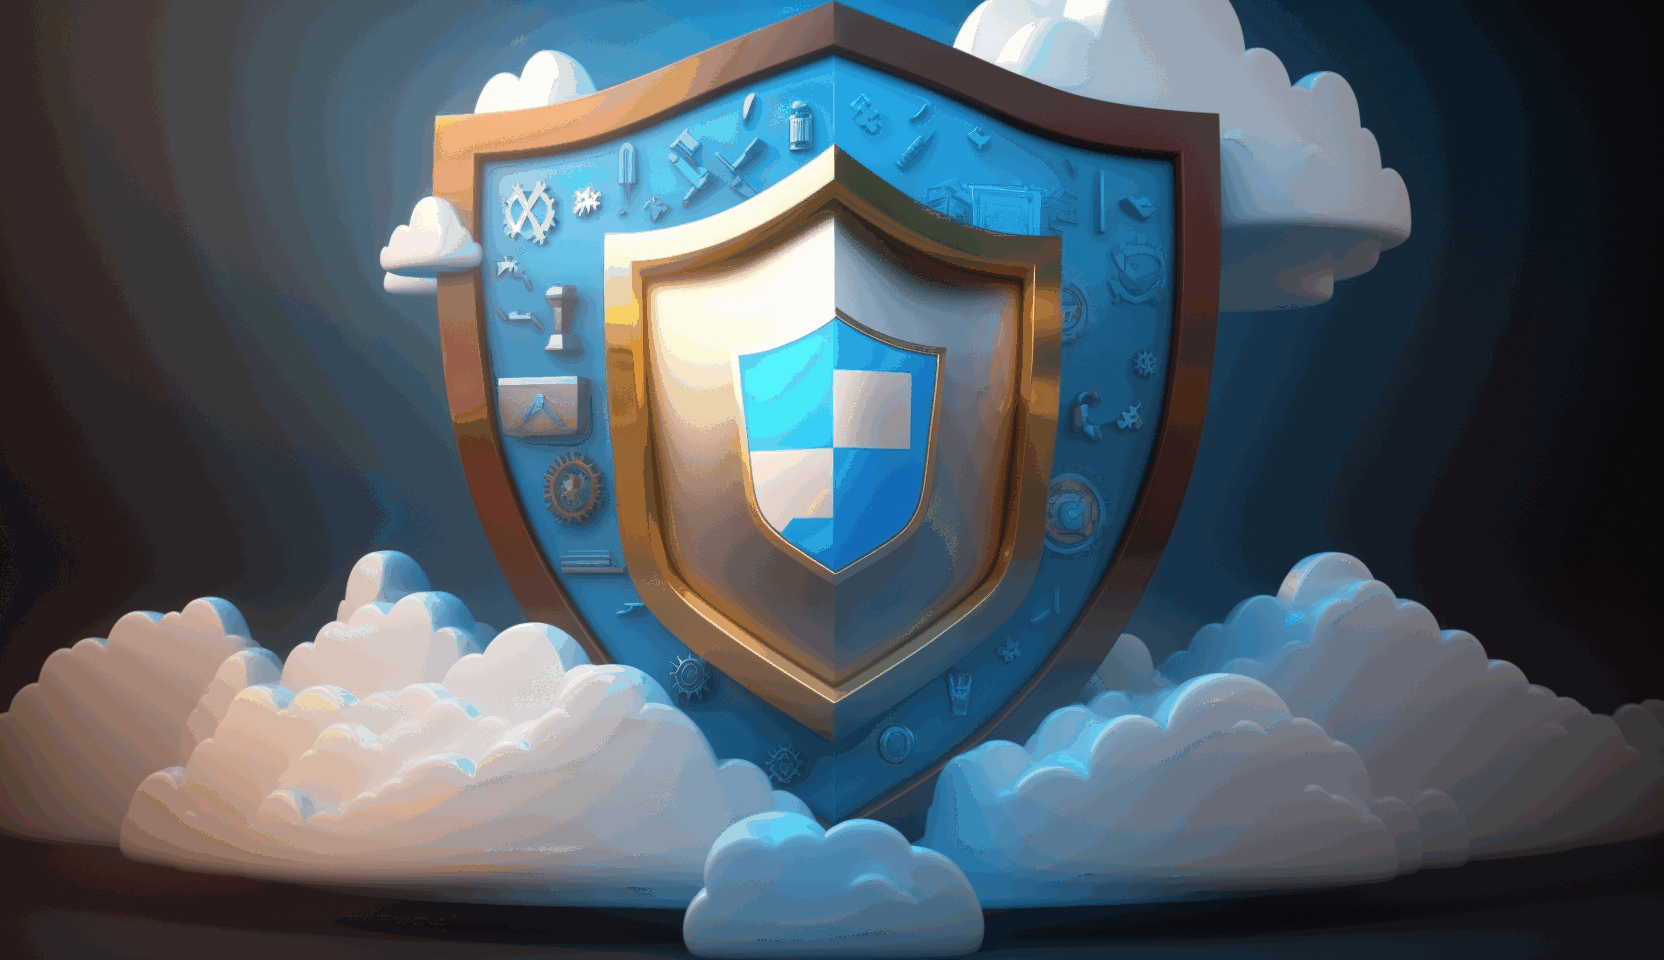 A shield icon surrounded by cloud symbols, representing a secure cloud environment, with the Azure Security Center logo on the shield.